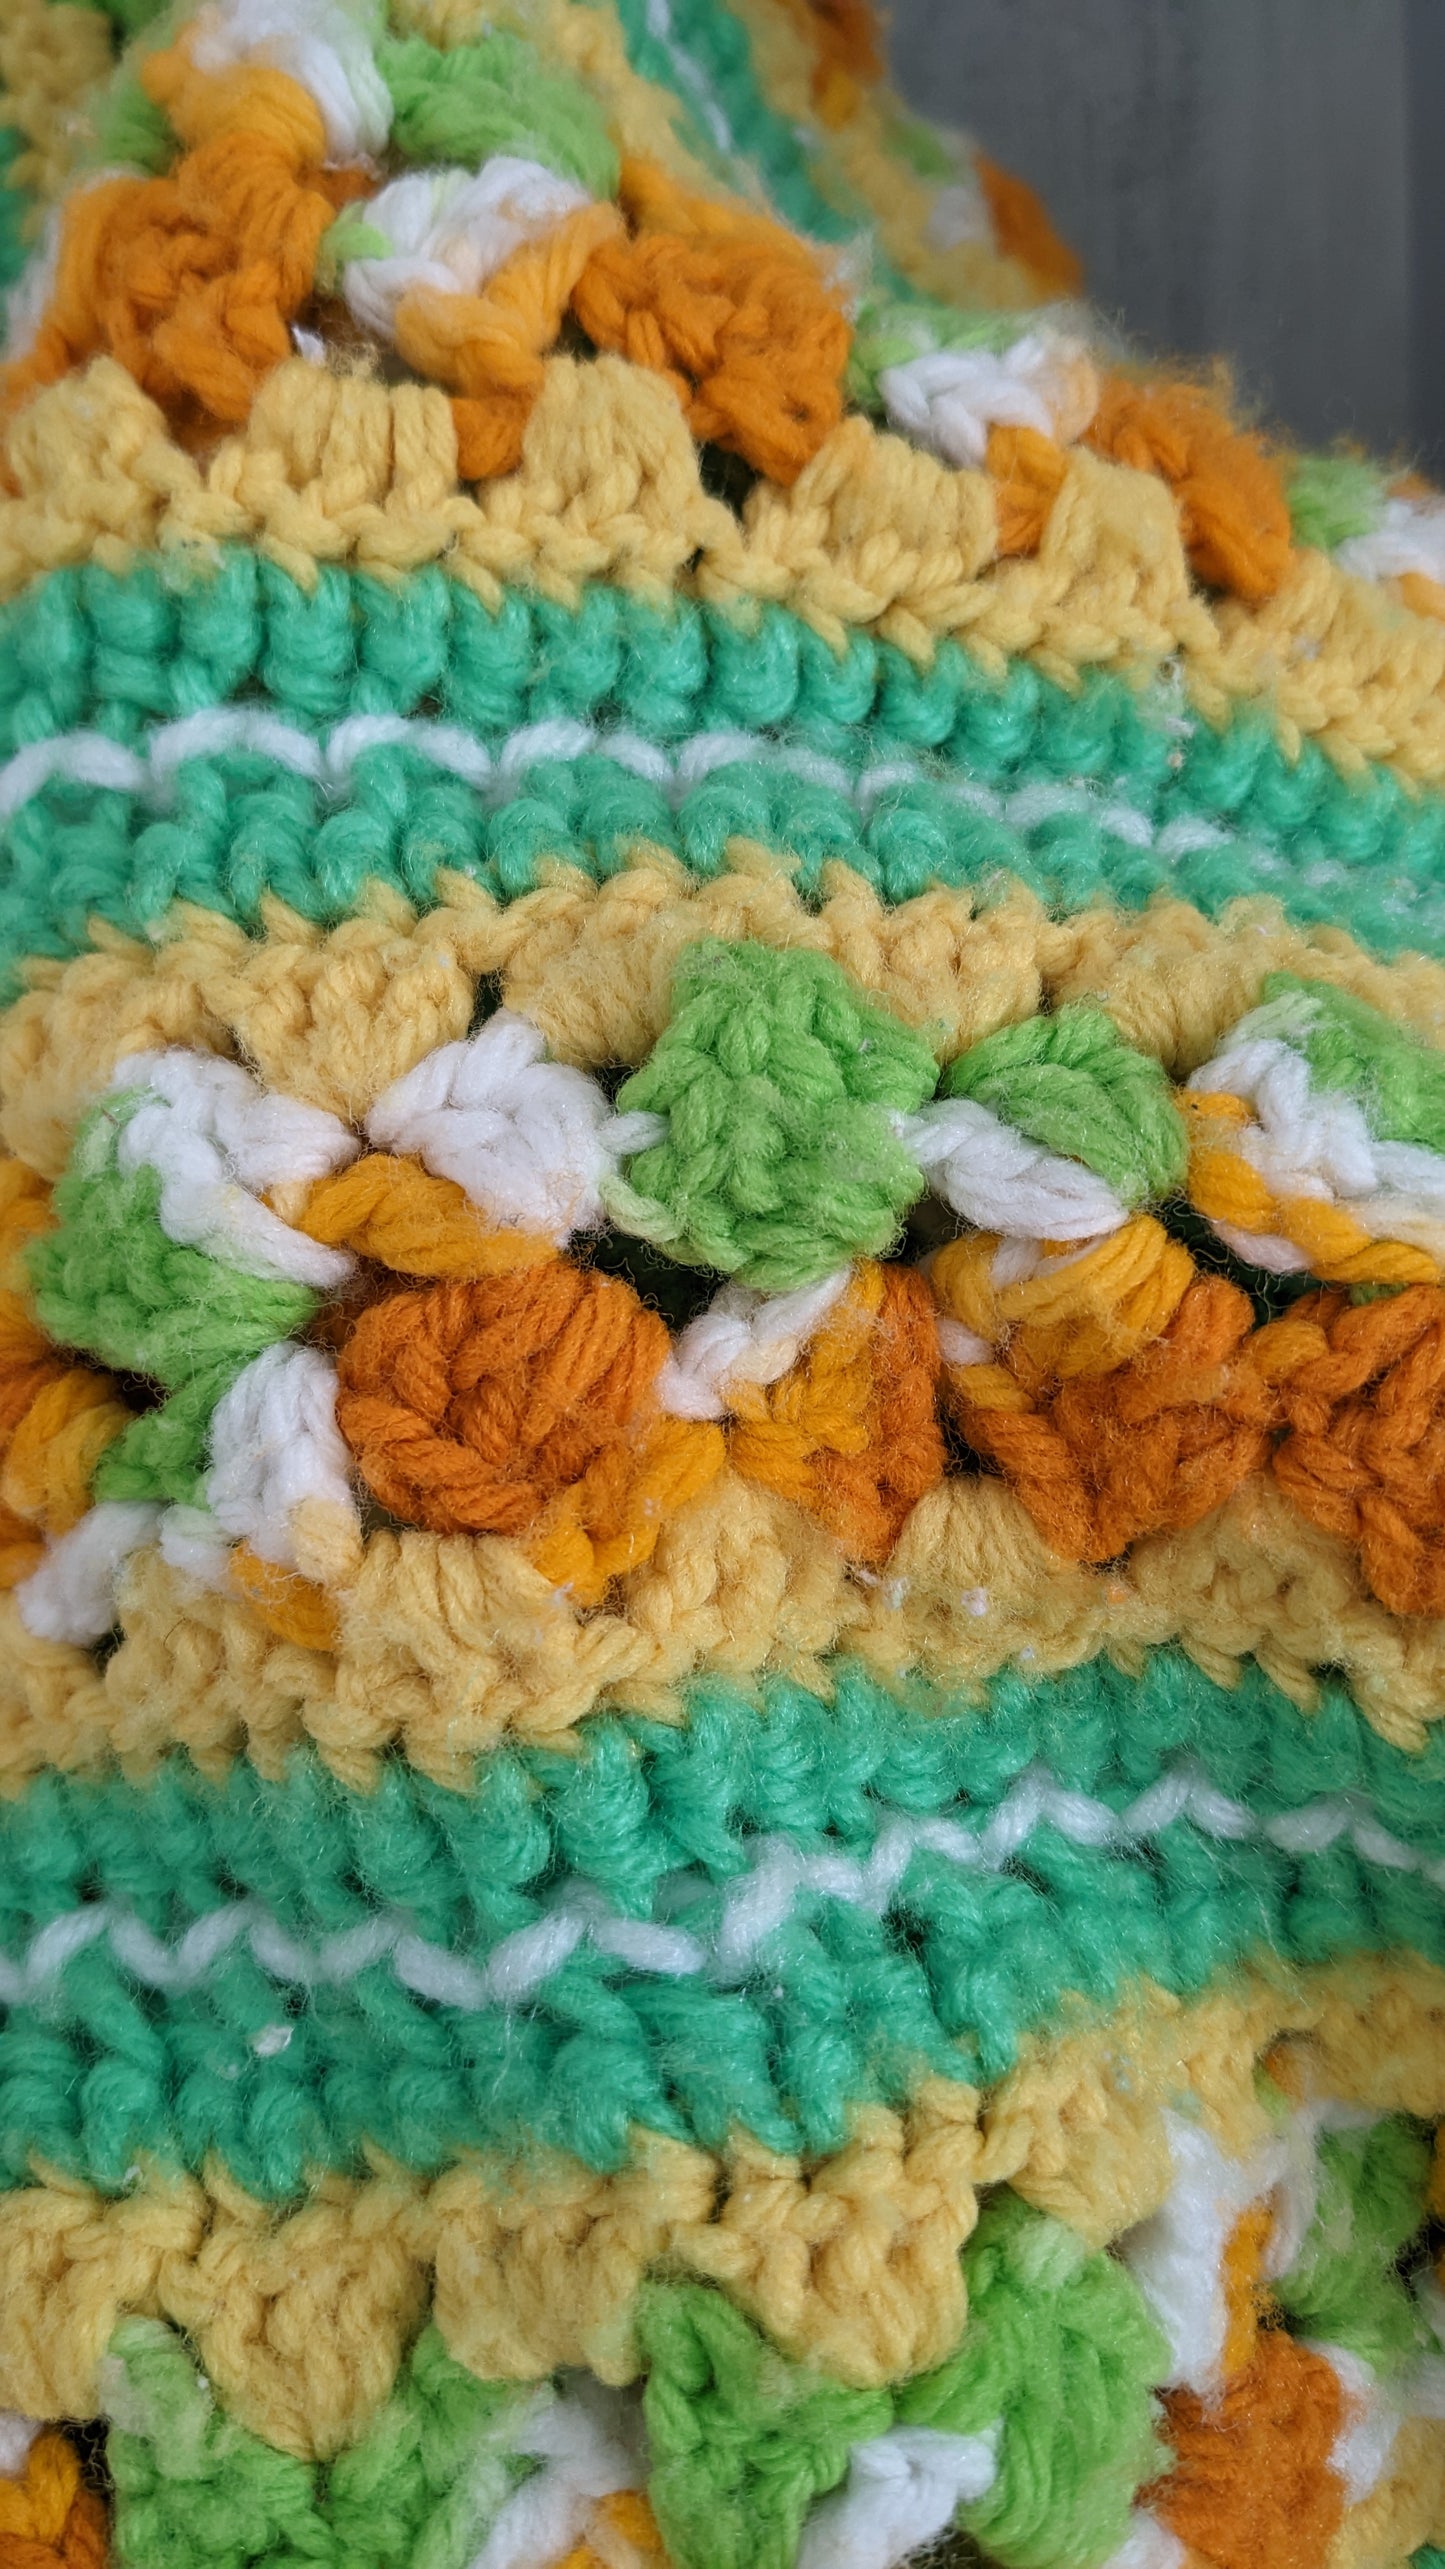 HandMade Yellow, Green, White and Orange Striped Afghan with Loops 76"x57"